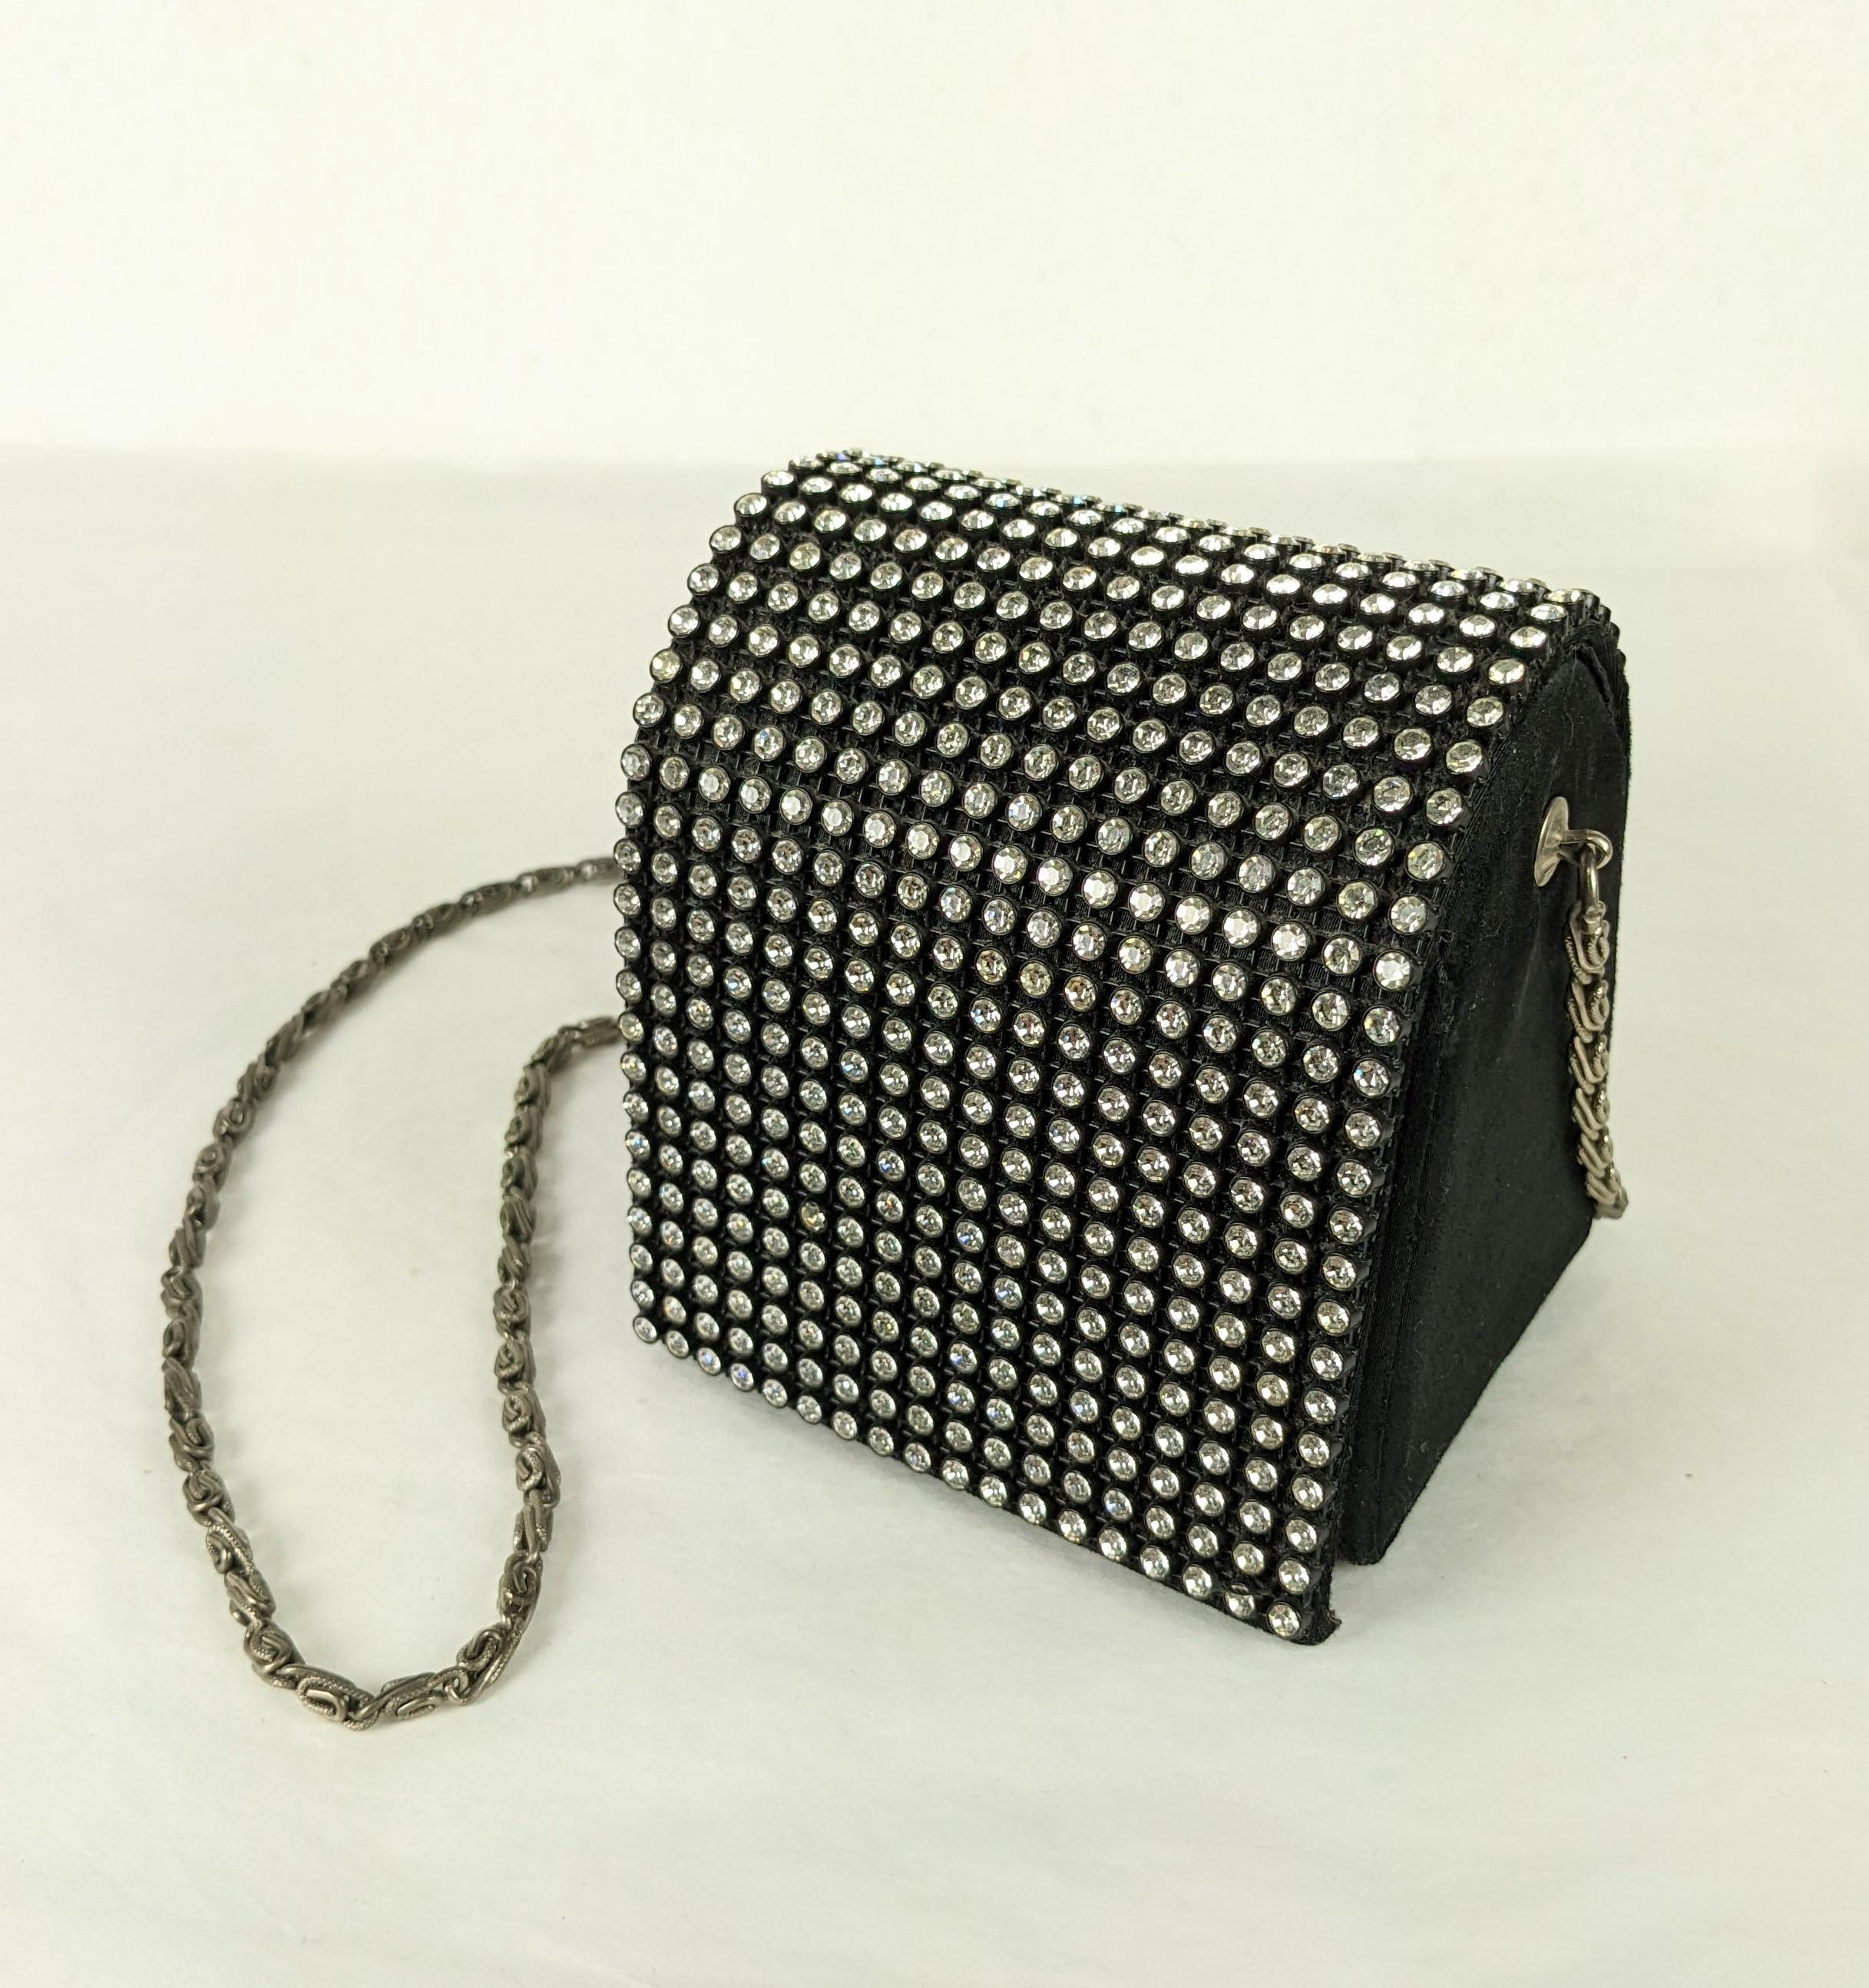 Charming Arnold Scassi Pave Box Bag with shoulder chain in black satin with pave rhinestone flap. Cute box shape with sparkling accents. Faille lining. 1960's USA. 
3.5